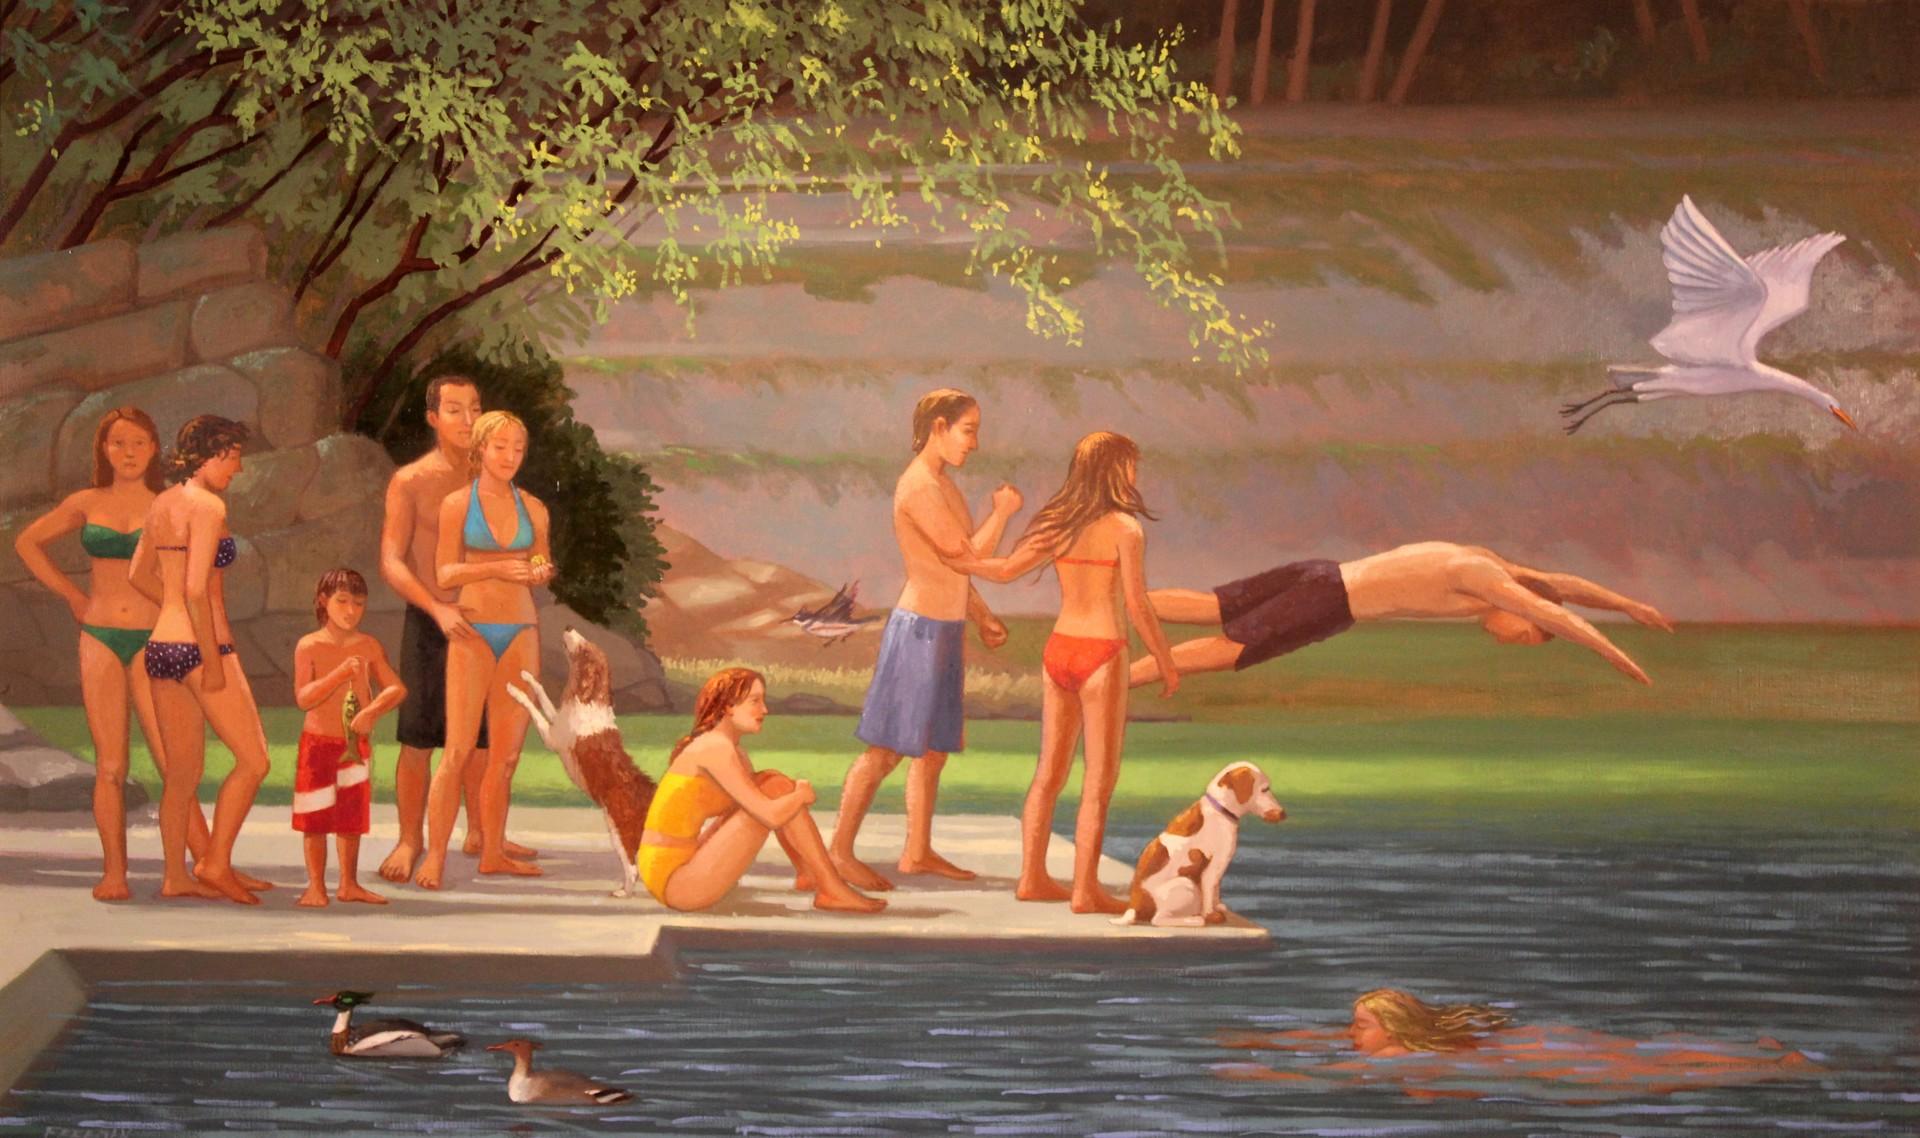 Kathryn Freeman Landscape Painting - Large Colorful Outdoor Landscape with Young Figures Having Fun on the River 